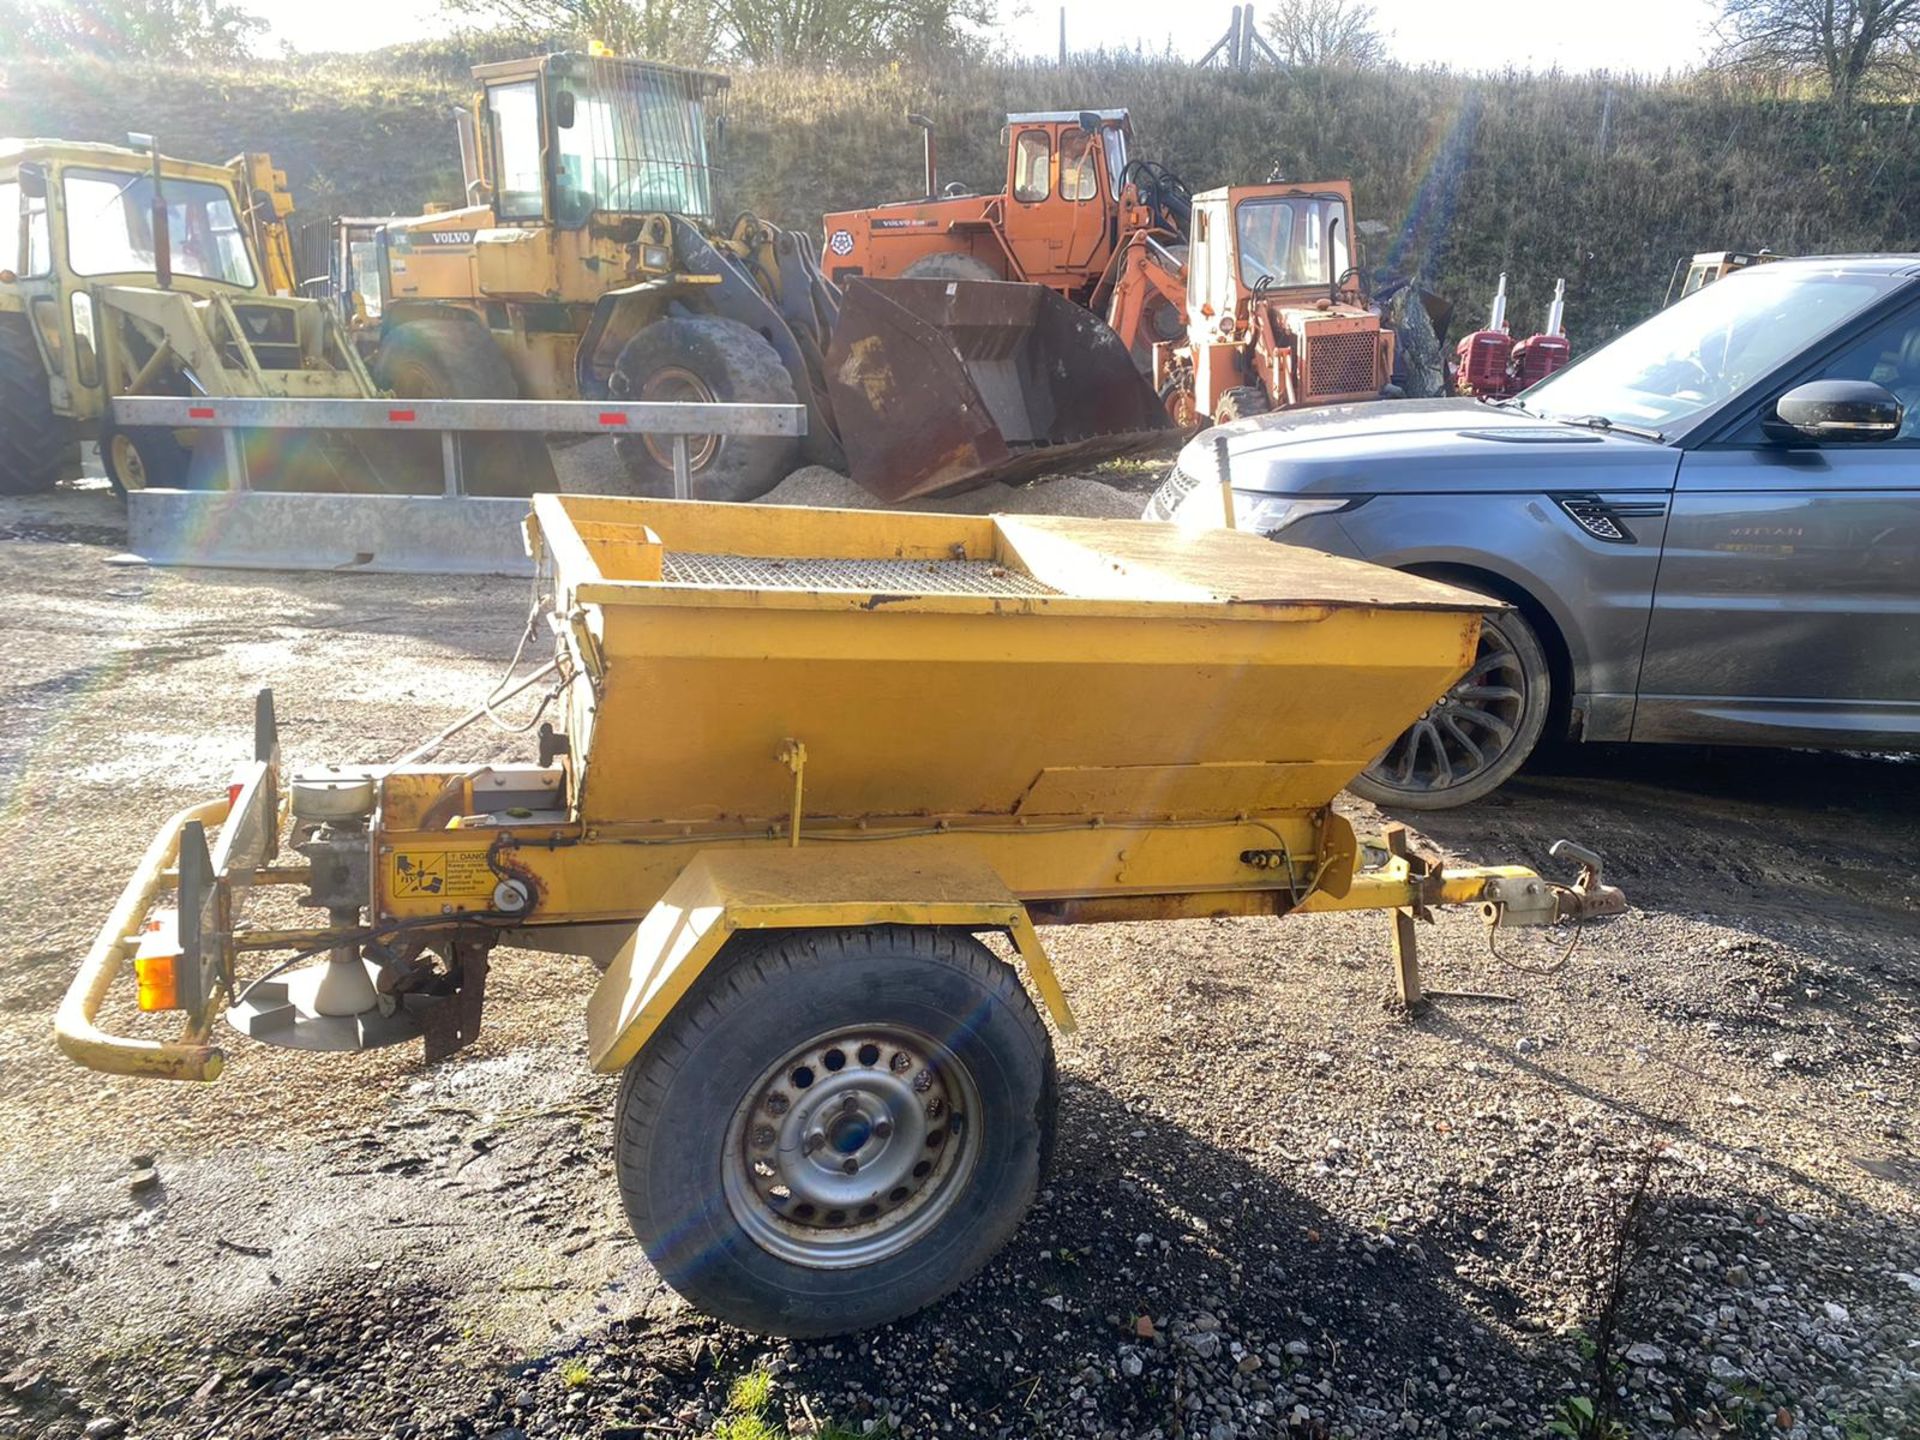 TOW BEHIND GRITTER IN WORKING ORDER *PLUS VAT*